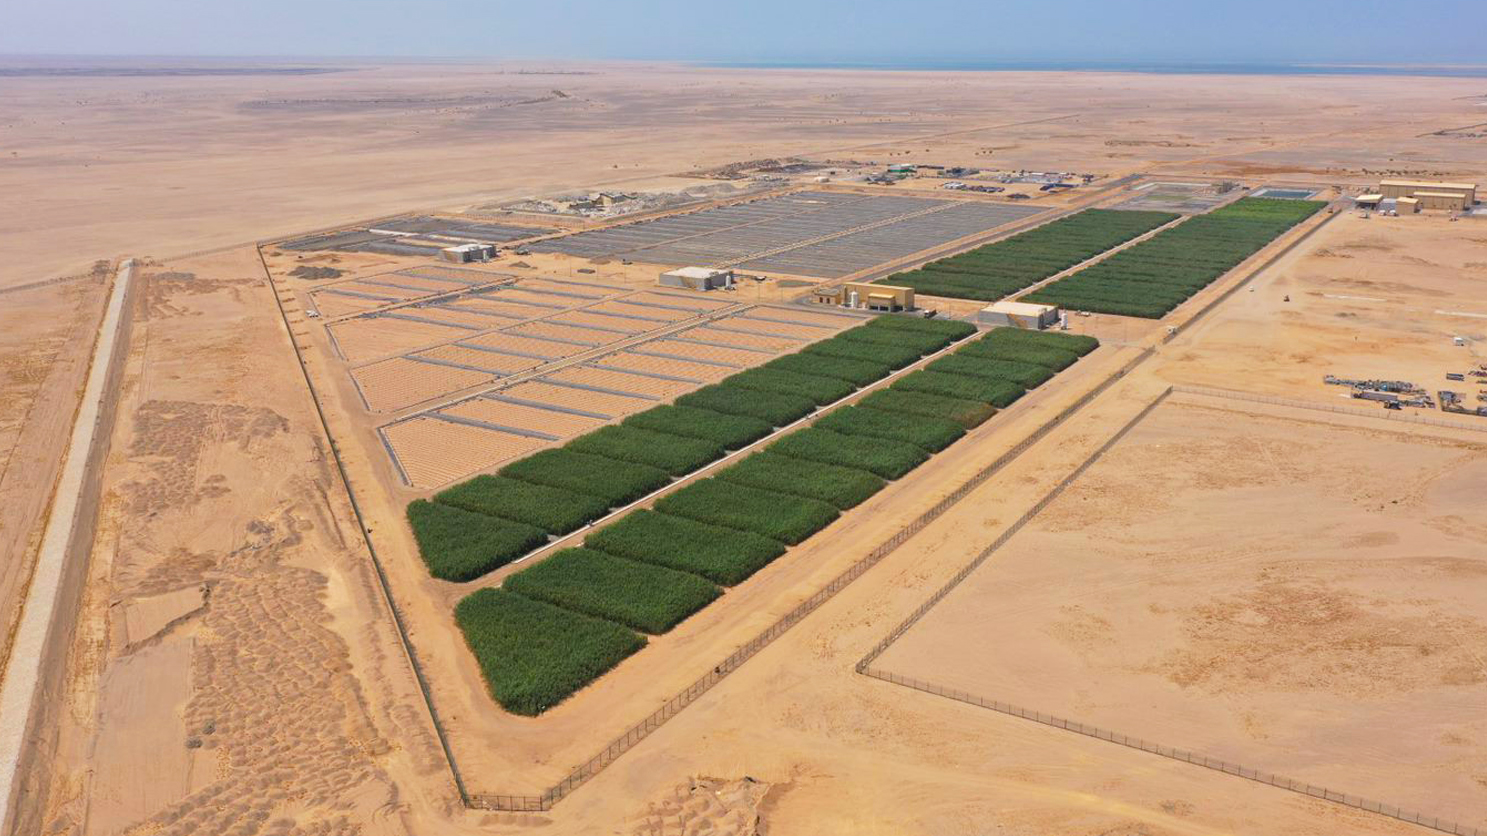 Red Sea Global and ACWA Power create more than 20 acres of new wetlands in line with Saudi Arabia’s climate action